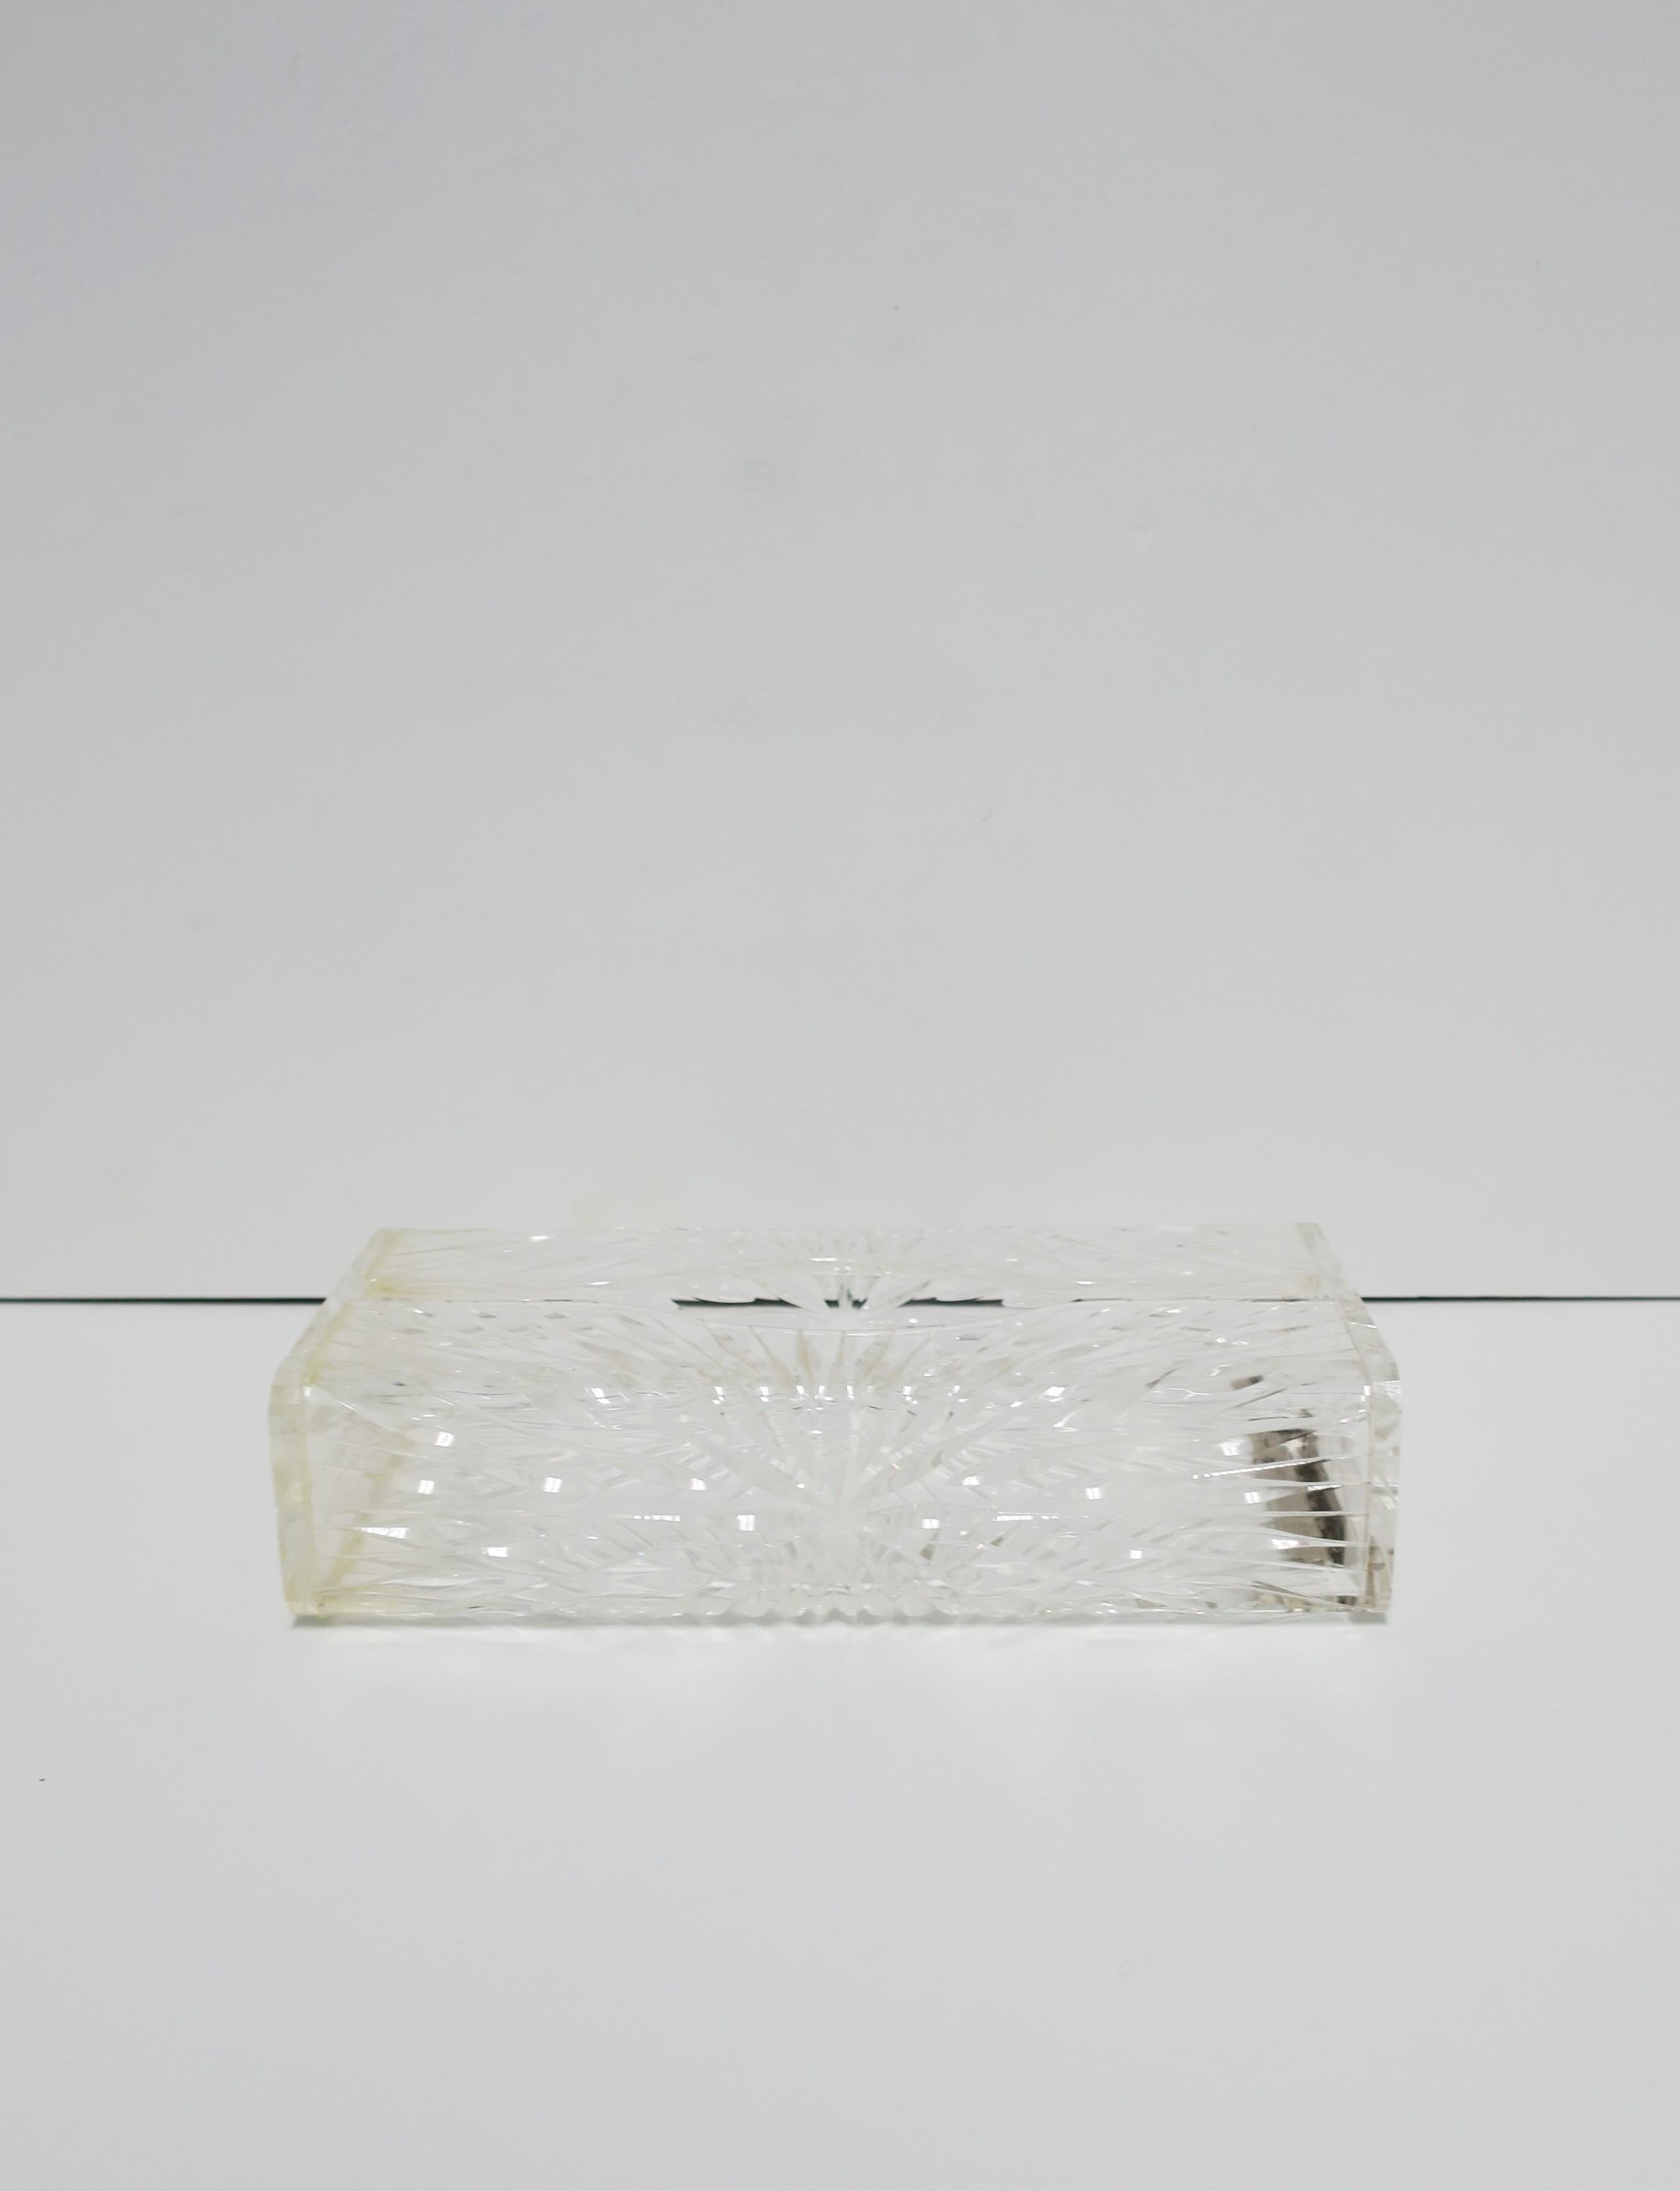 Mid-20th Century Lucite Tissue Box Cover Holder by Wilardy For Sale